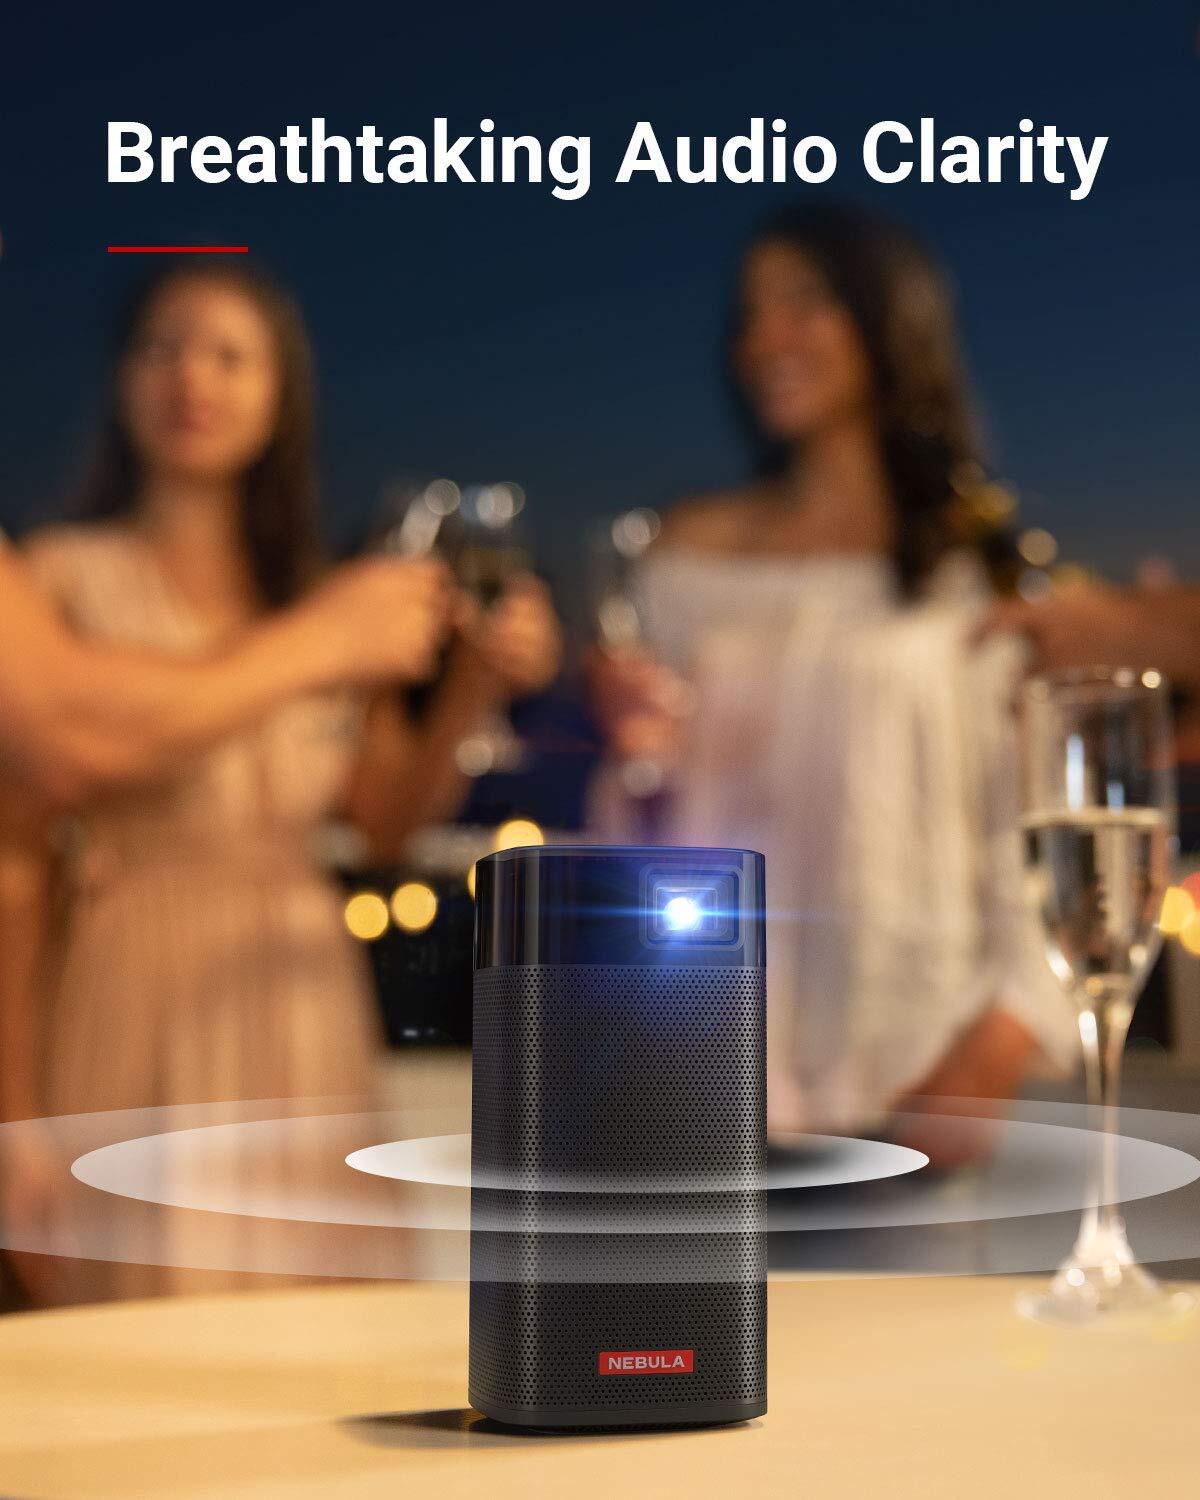 Anker Nebula Apollo, Wi-Fi Mini Projector, 200 ANSI Lumen Portable Projector, 6W Speaker, Movie Projector, 100 Inch Picture, 4-Hour Video Playtime, Outdoor Projector—Watch Anywhere-M000000000256 www.mysocially.com